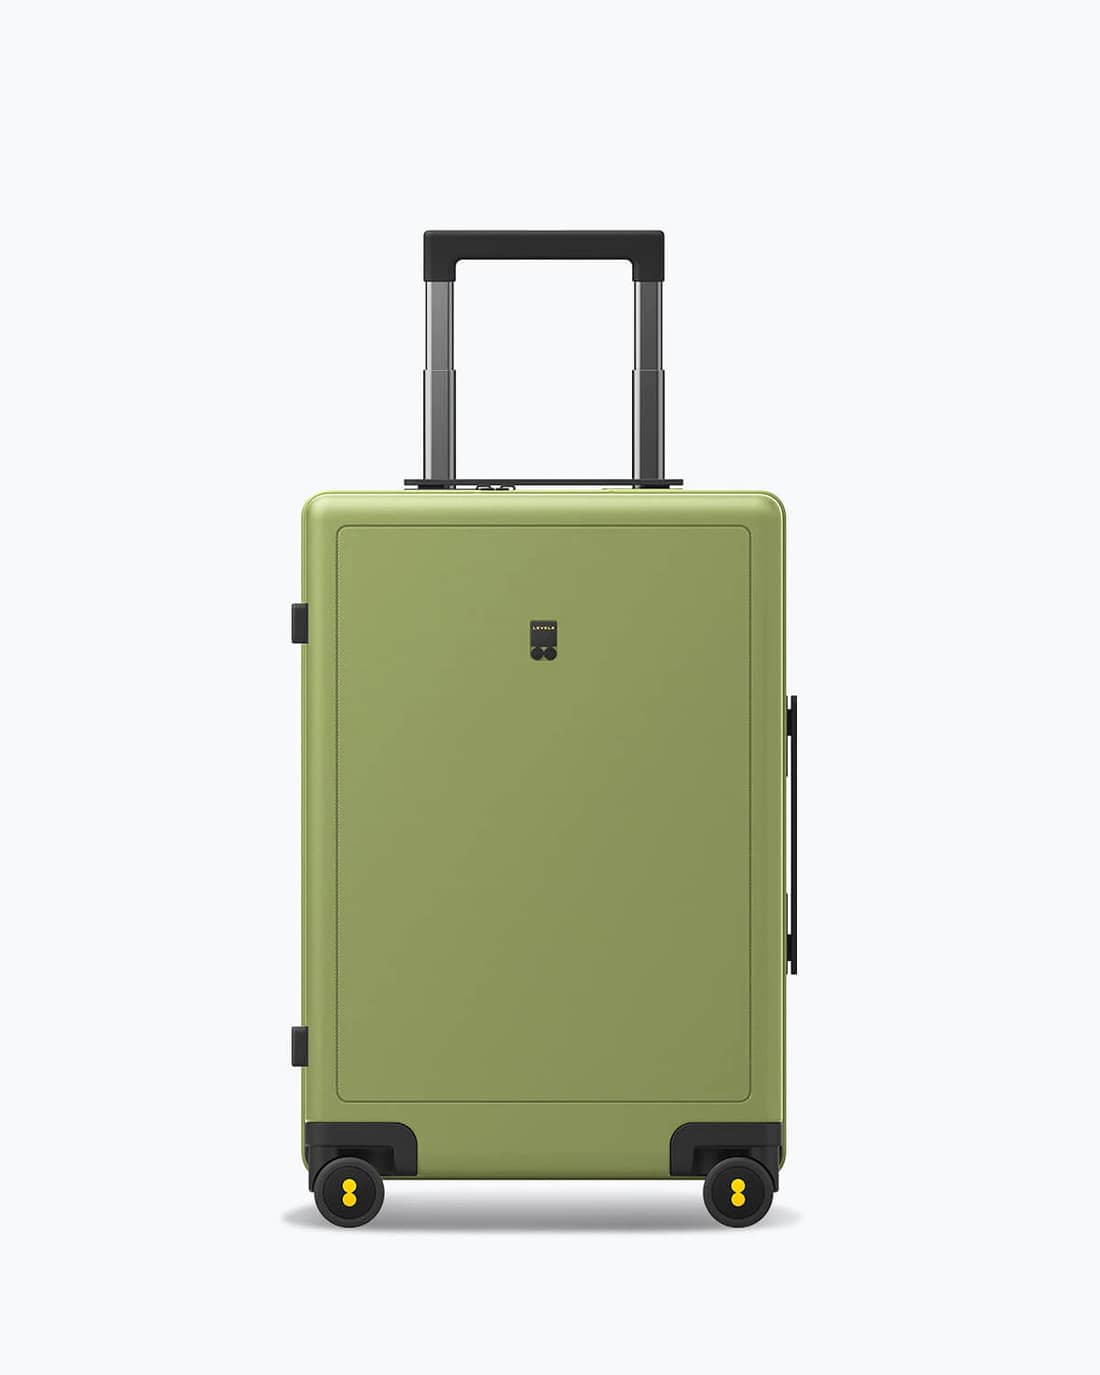 Affordable Carry-On Luggage